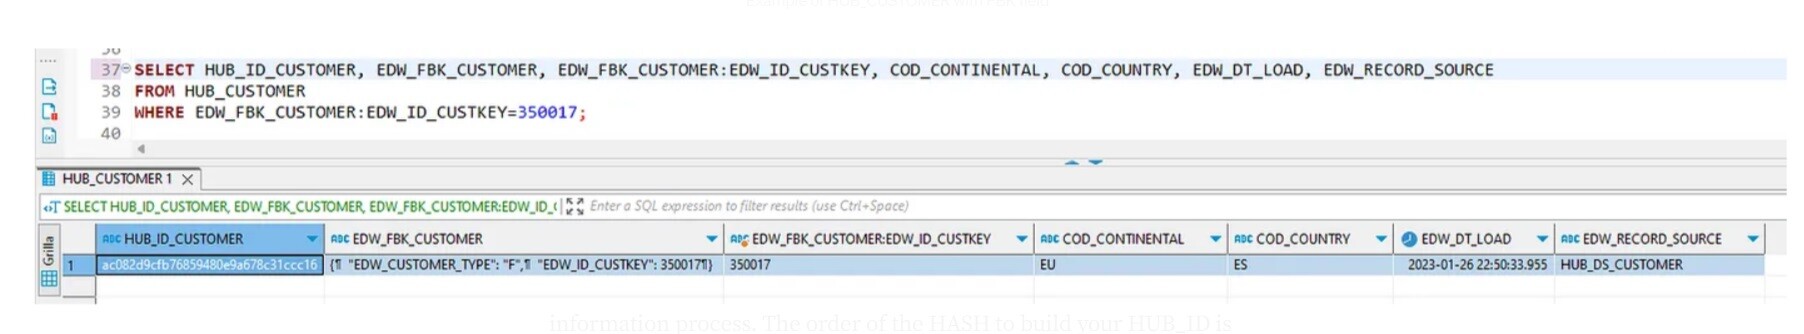 Query on HUB_CUSTOMER filtering by BK in a FBK field